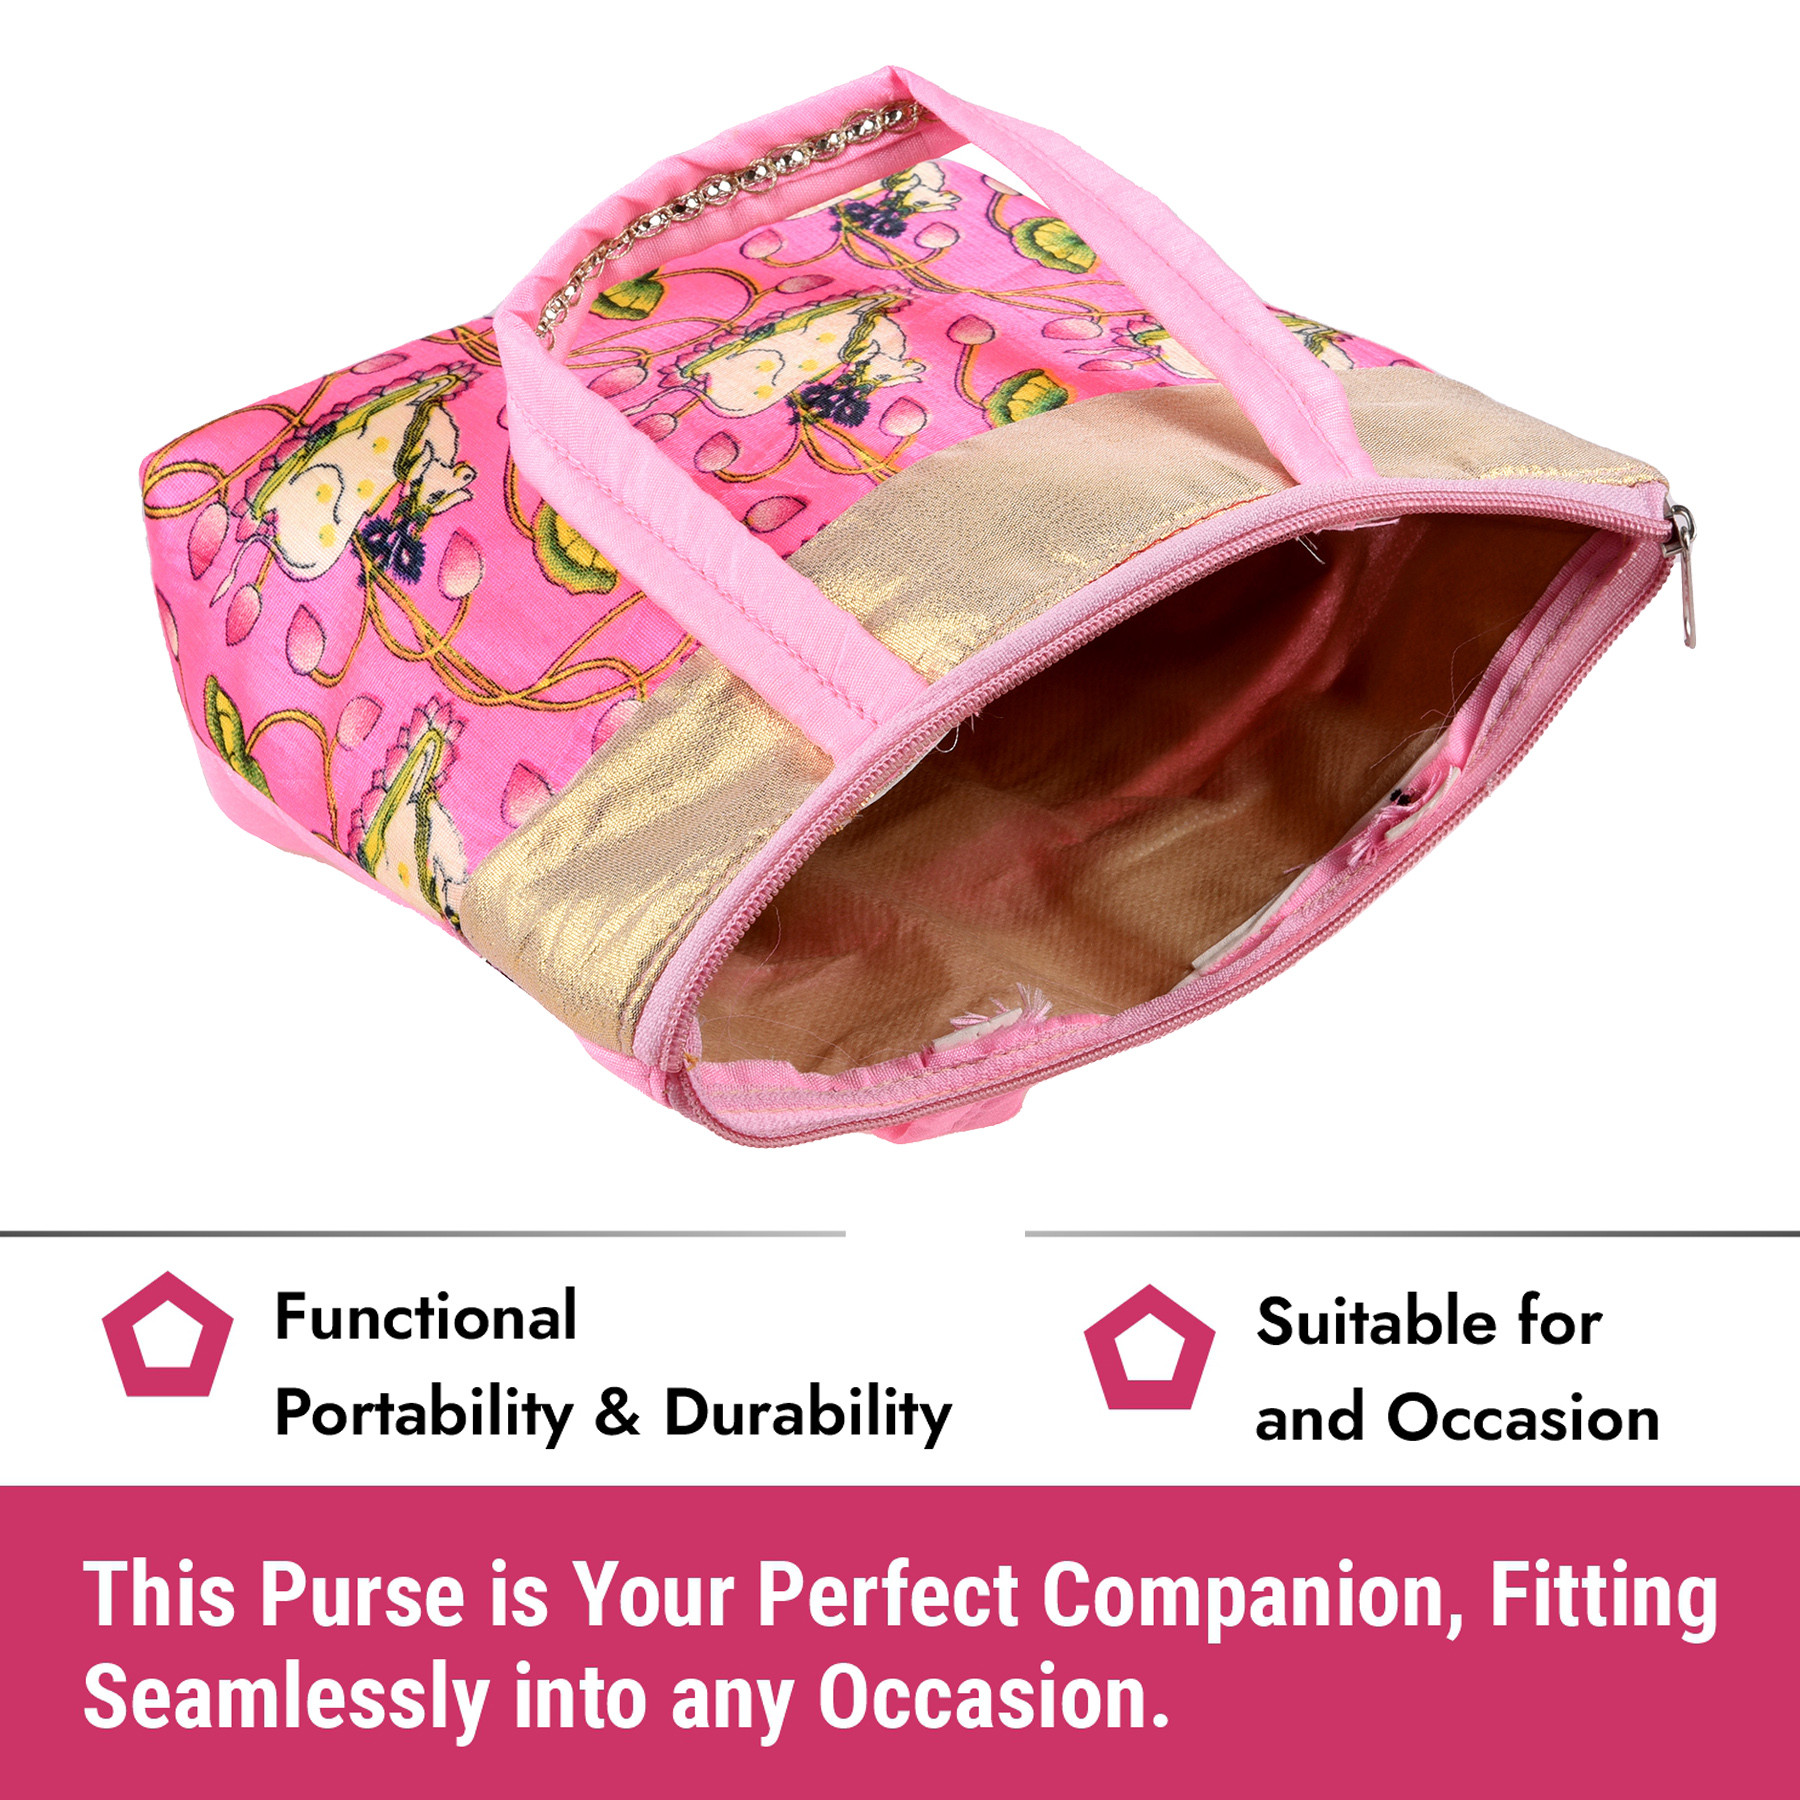 Kuber Industries Hand Purse | Traditional Mini Hand Bag | Silk Wallet Hand Bag | Shagun Hand Purse | Woman Tote Hand Bag | Gifts Hand Bag | Cow-Small Hand Purse | Pack of 3 | Multi